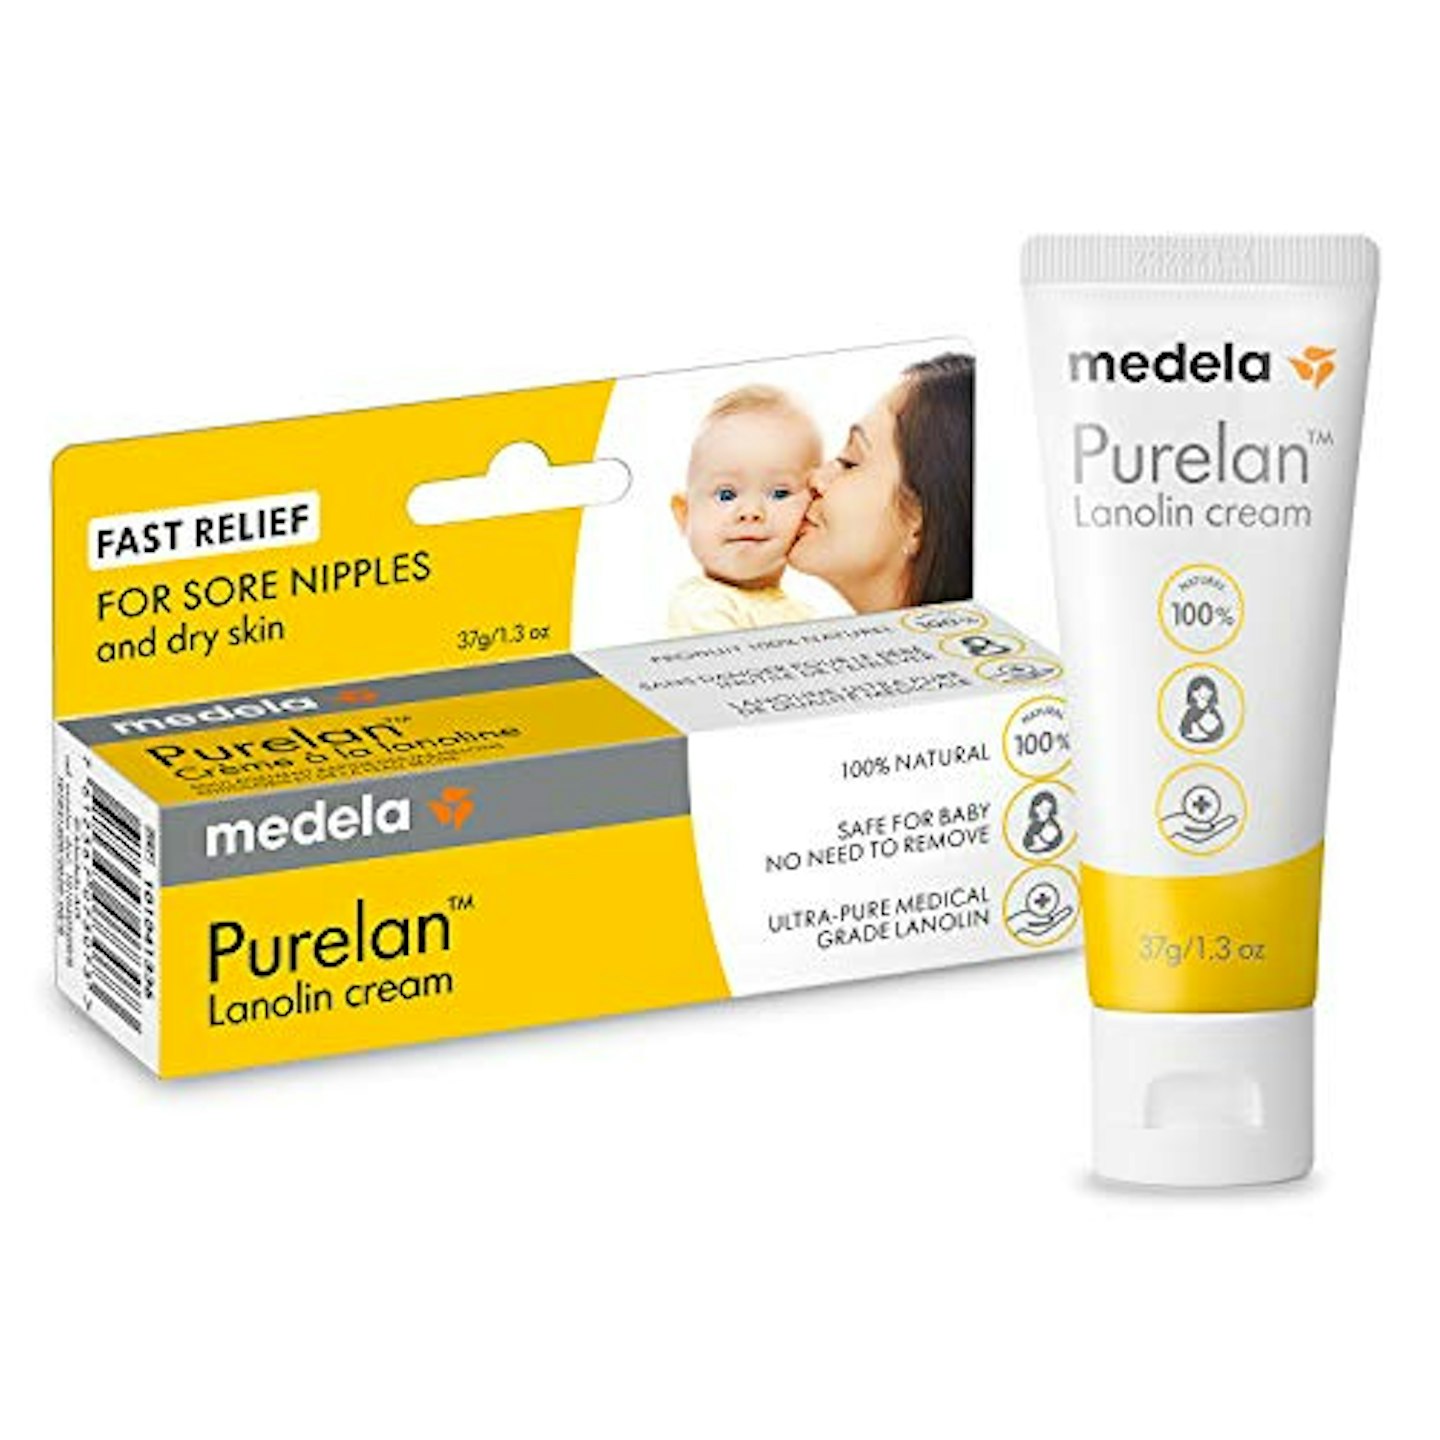 Pigeon Nipple Care Cream - recommended for breastfeeding moms to heal